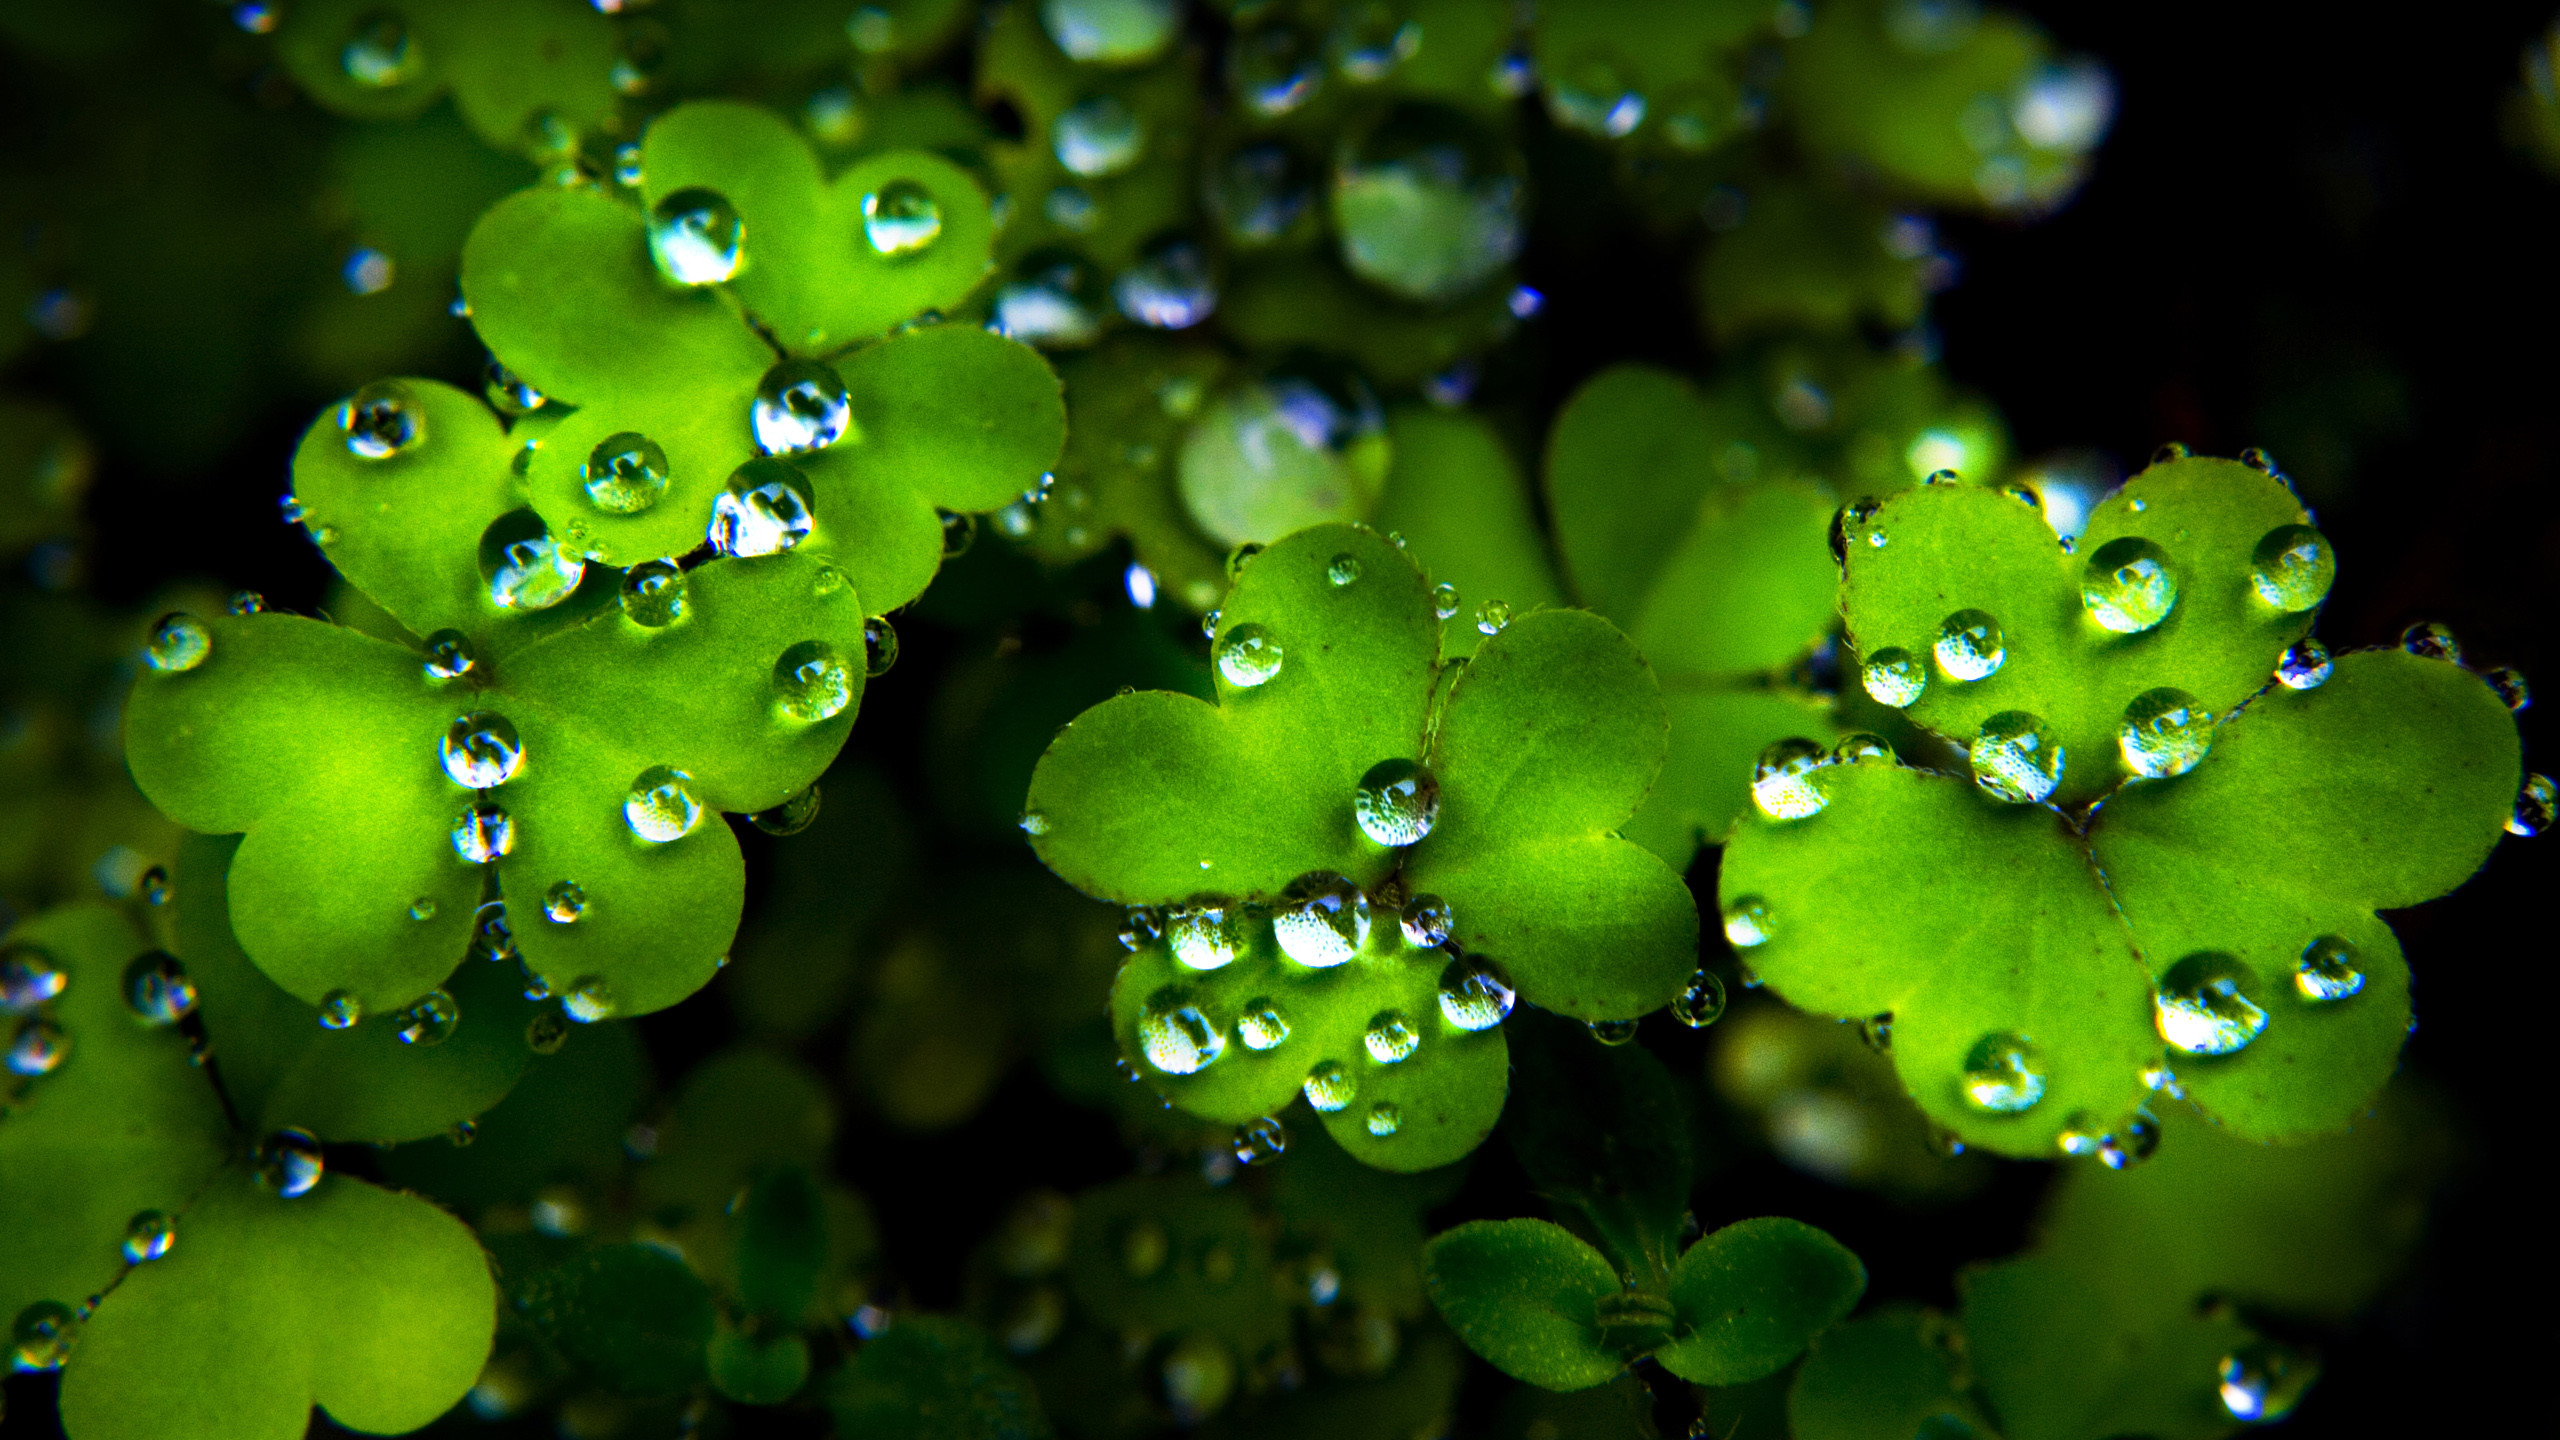 2560x1440 Happy St Patrick's Day - Wallpaper, High Definition, High Quality .